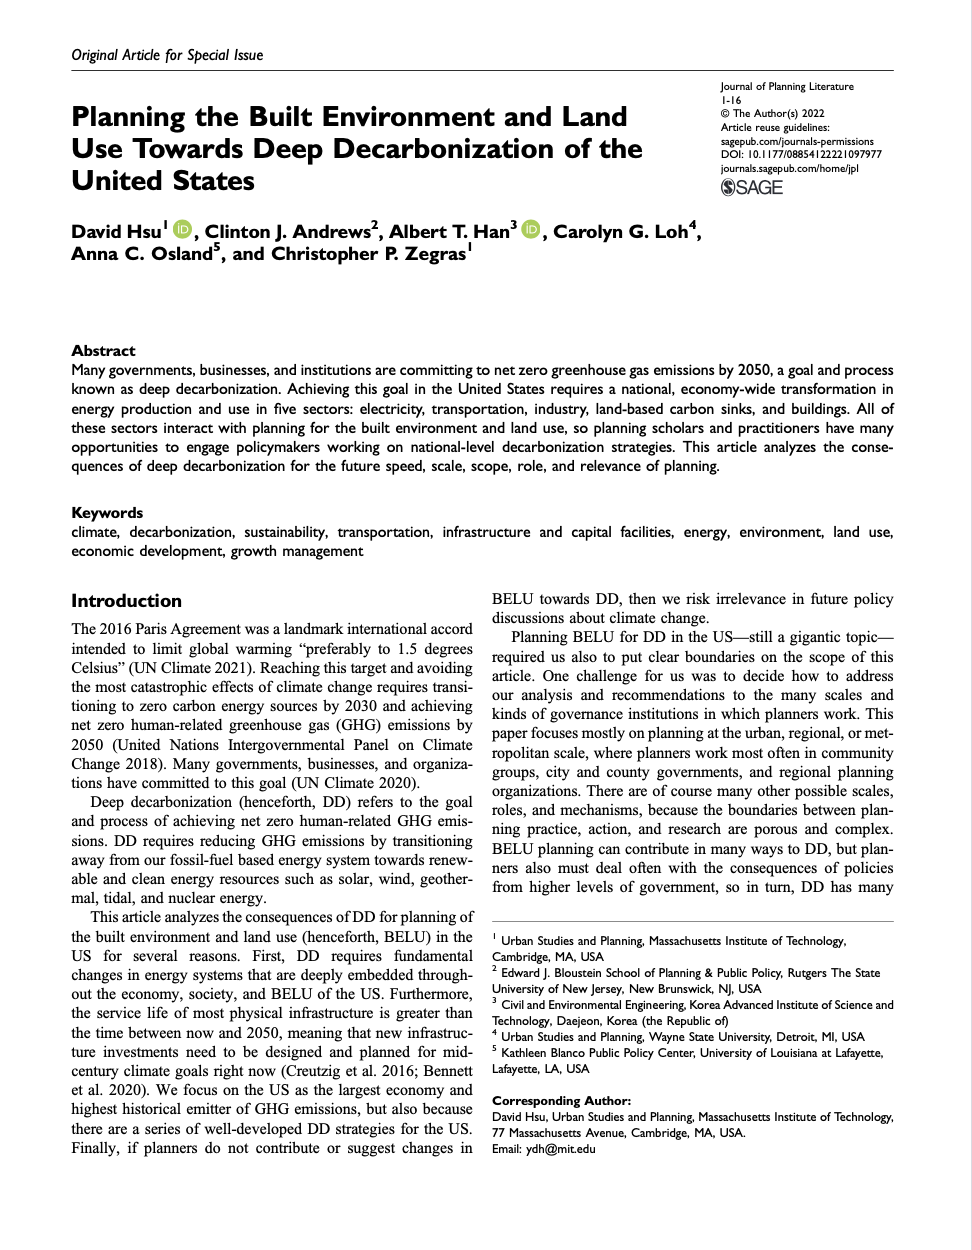 Planning the Built Environment and Land Use Towards Deep Decarbonization of the United States